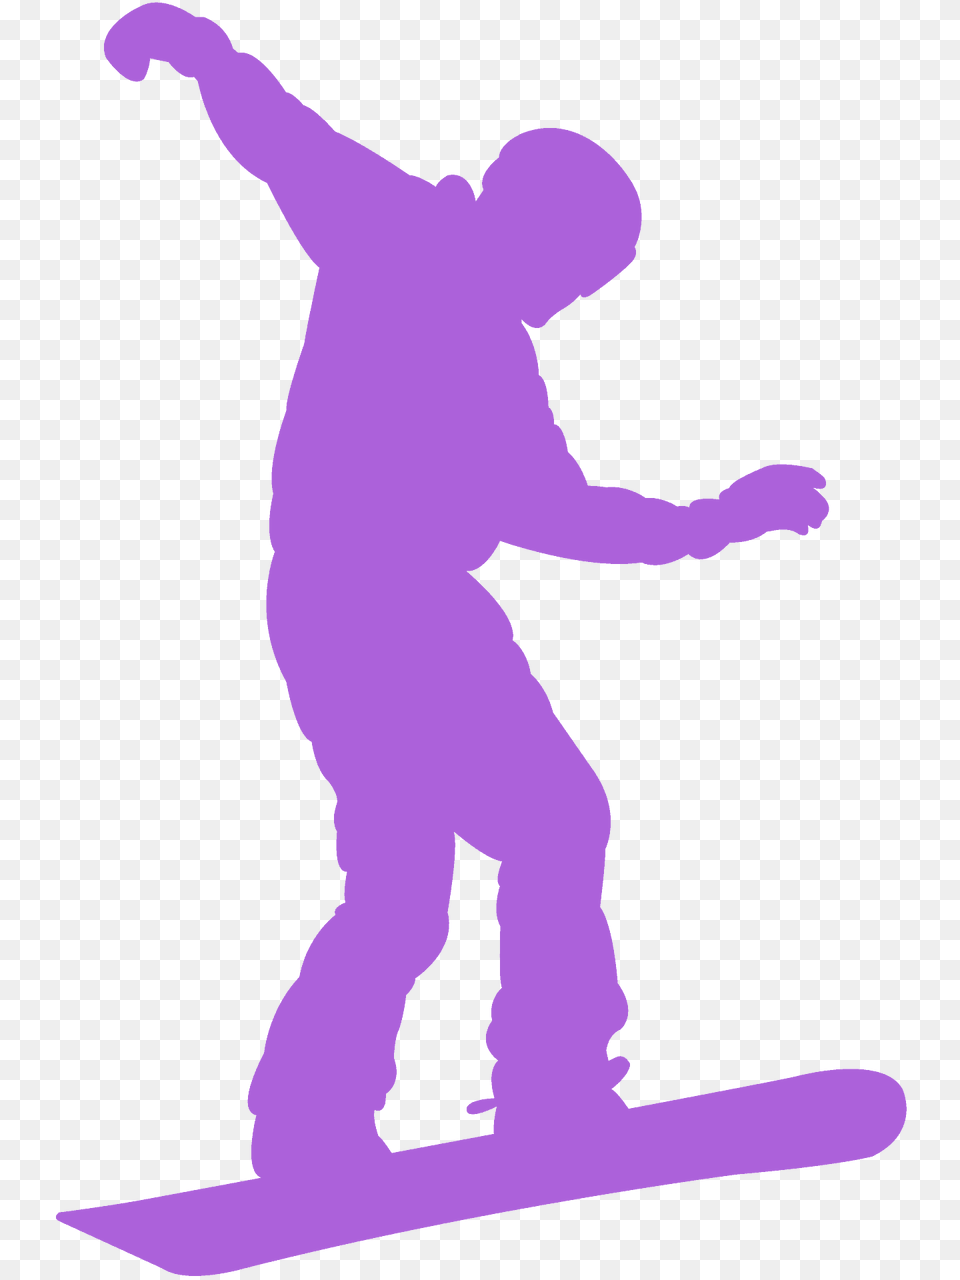 Snowboarder Silhouette, Adventure, Leisure Activities, Nature, Outdoors Png